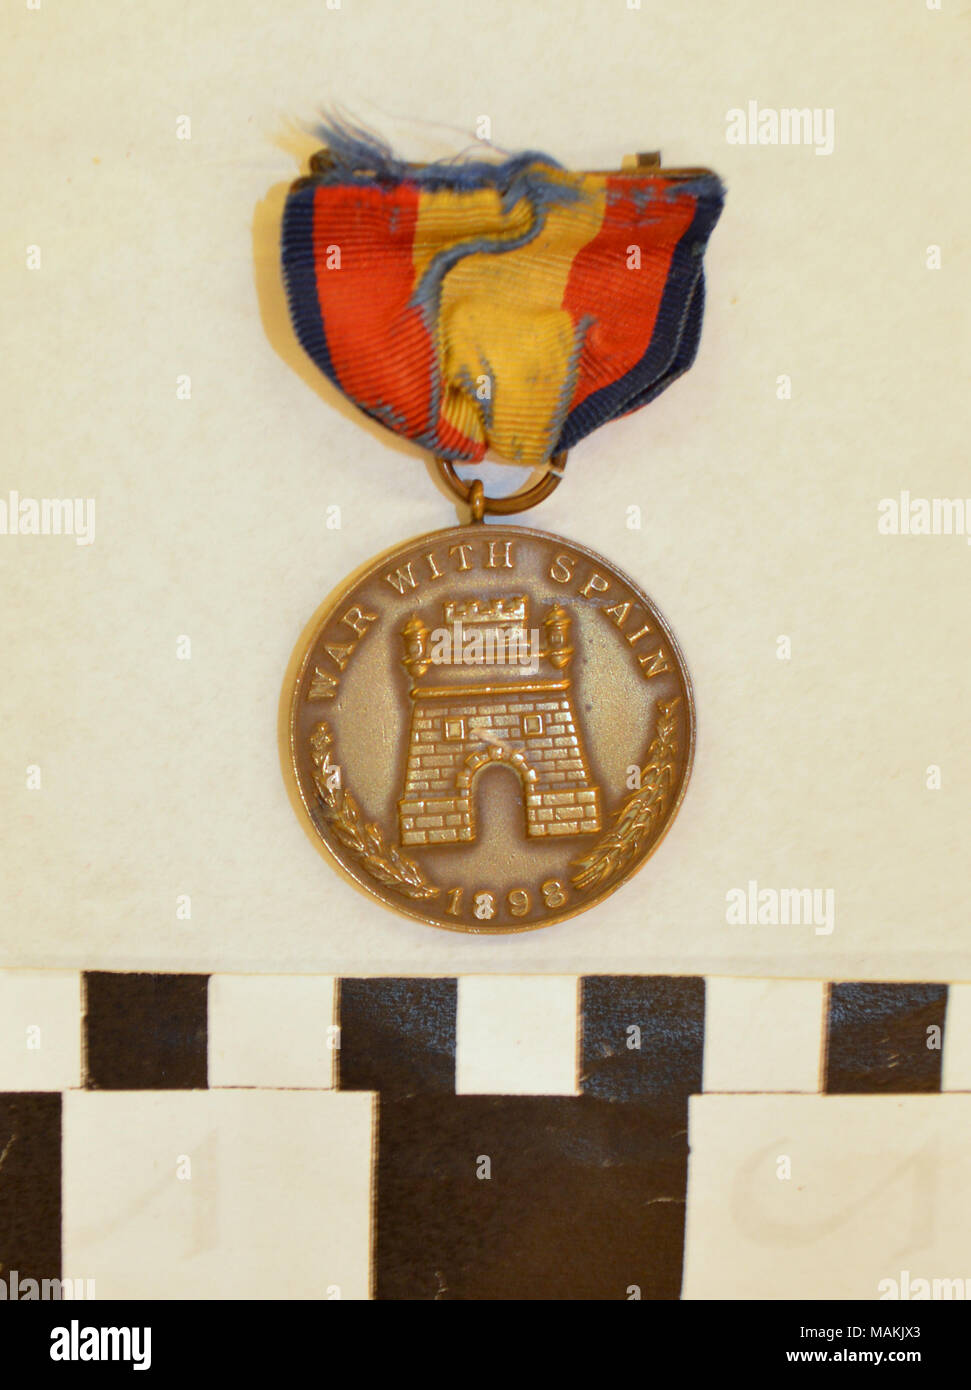 U.S. Army Spanish American War Medal issued to Frank Rumbold for his service in the war. Title: U.S. Army Spanish American War Medal of Frank Rumbold  . 1905. Army Heraldic Section (design) Stock Photo